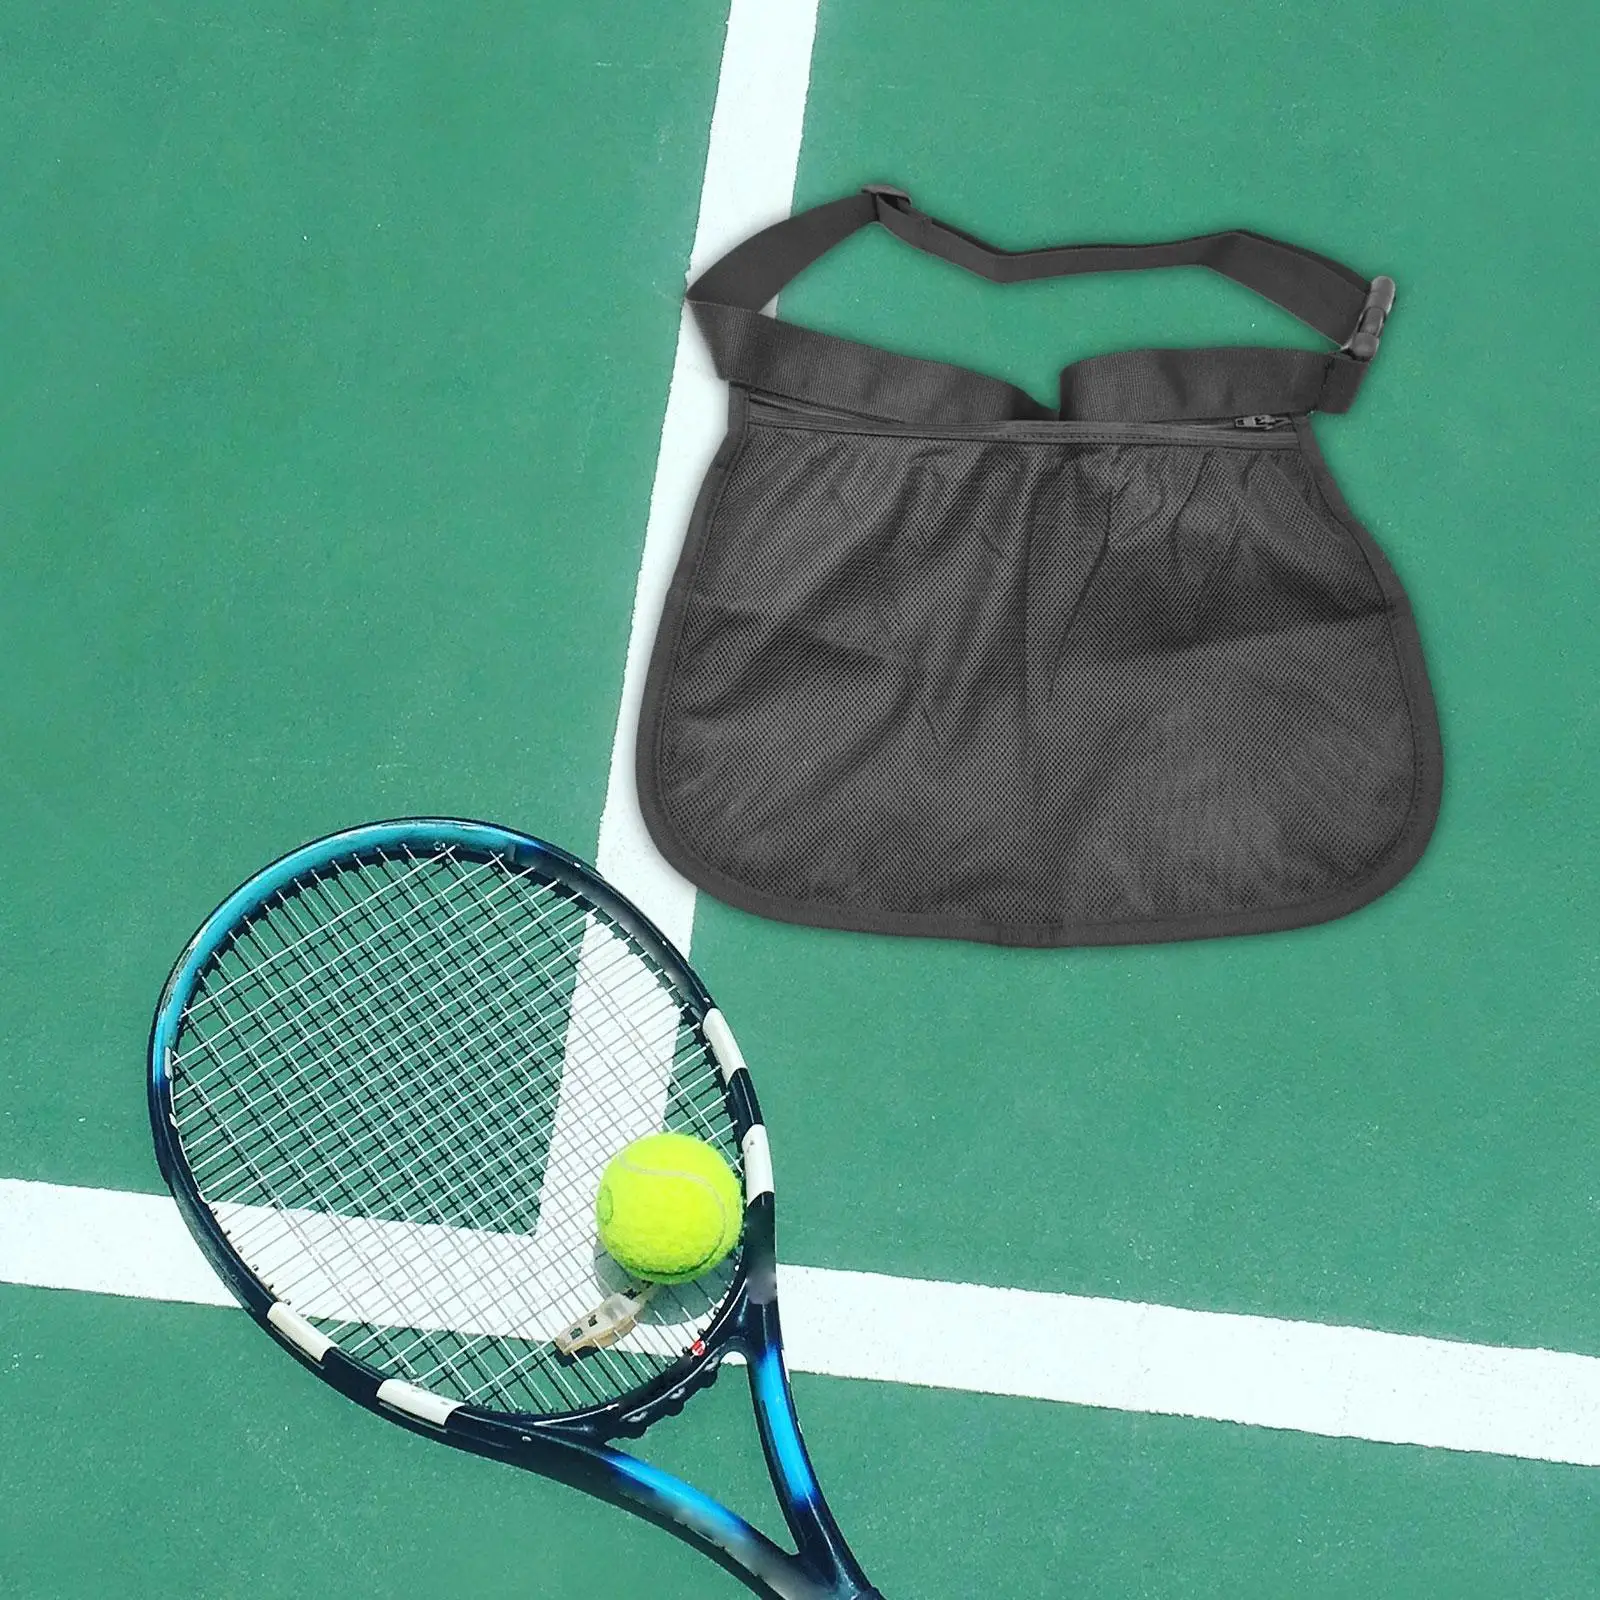 Black Tennis Ball Holder Carrier Waist Hip Bag Outdoor Ball Storage Bag for Fitness Storing Balls and Phones Workout Exercise